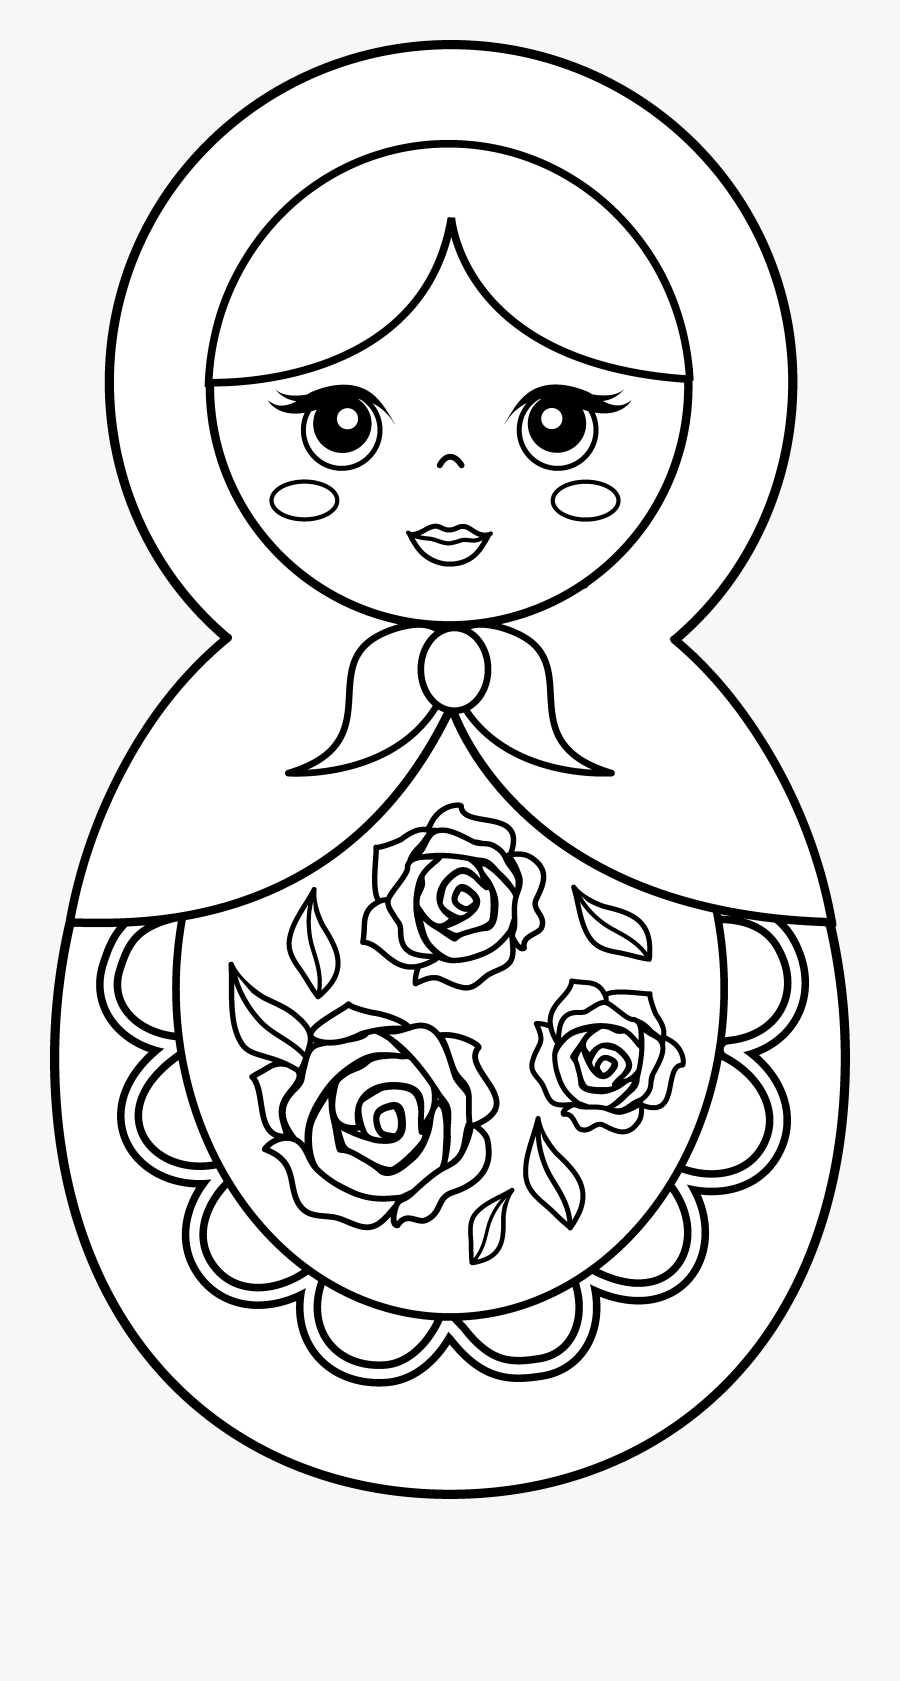 Clip Download Flute Clipart Colouring Page - Russian Doll Coloring Page, Transparent Clipart